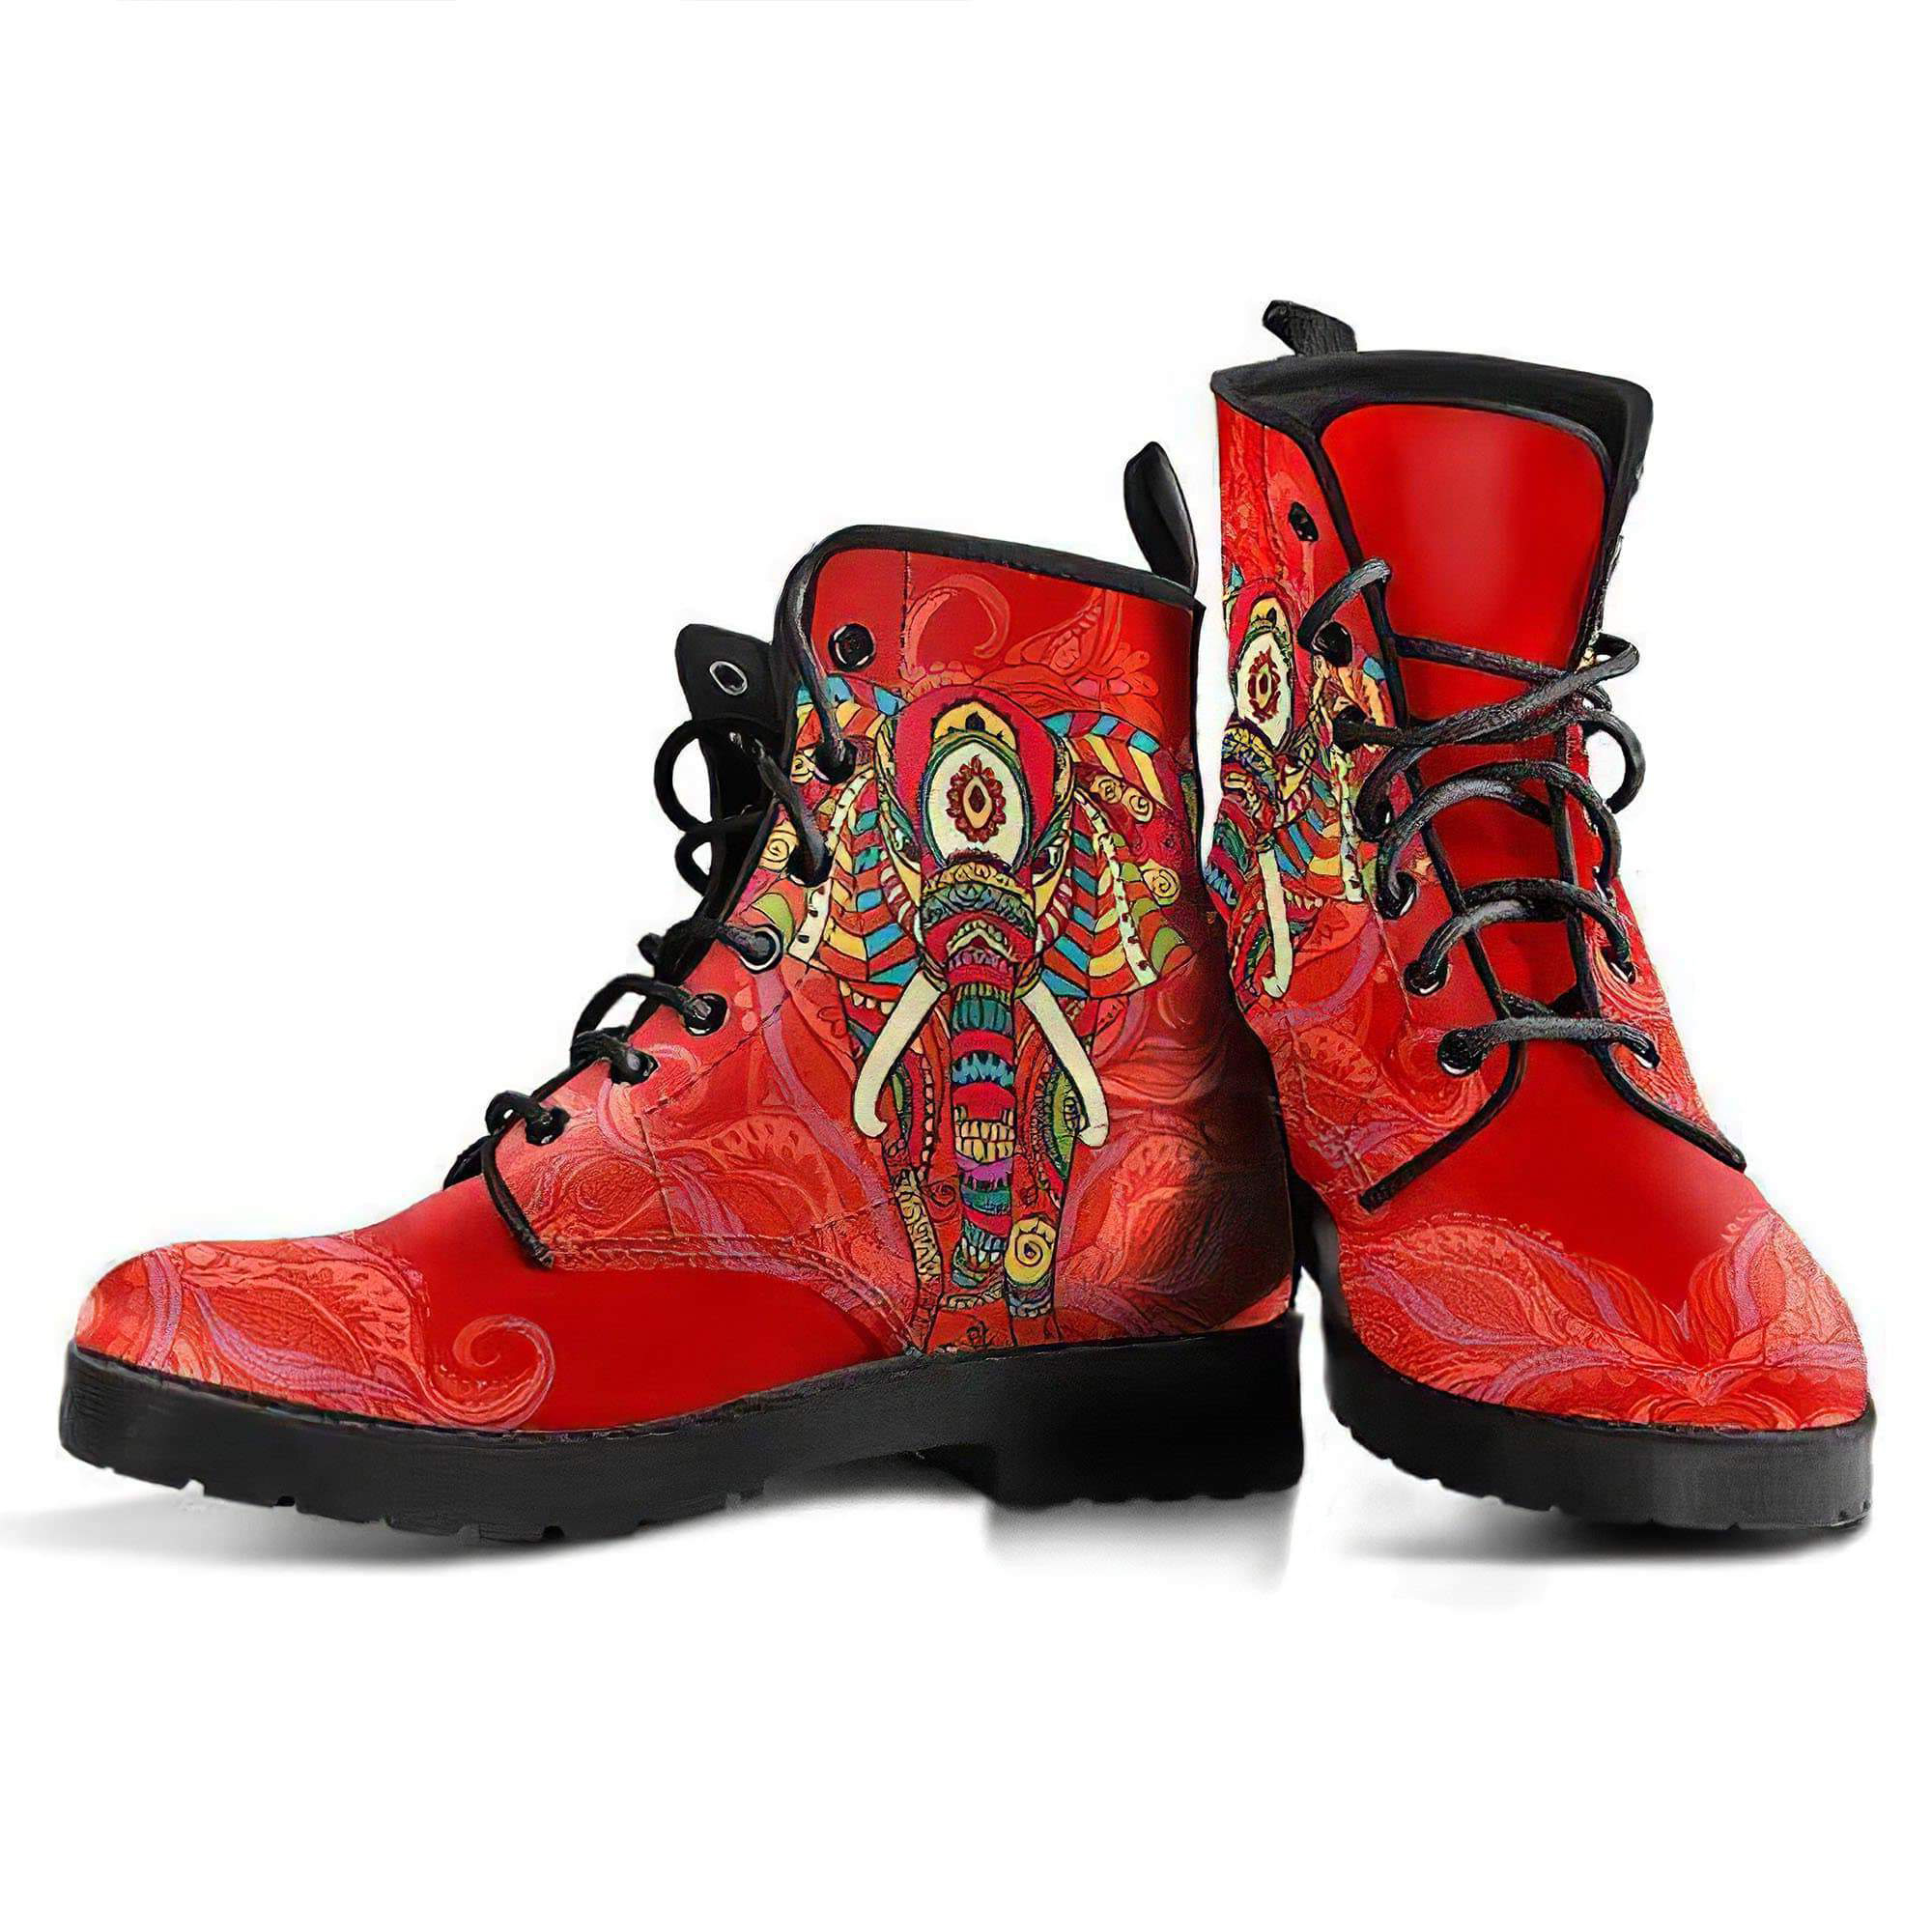 red-elephant-handcrafted-boots-women-s-leather-boots-12051943161917.jpg